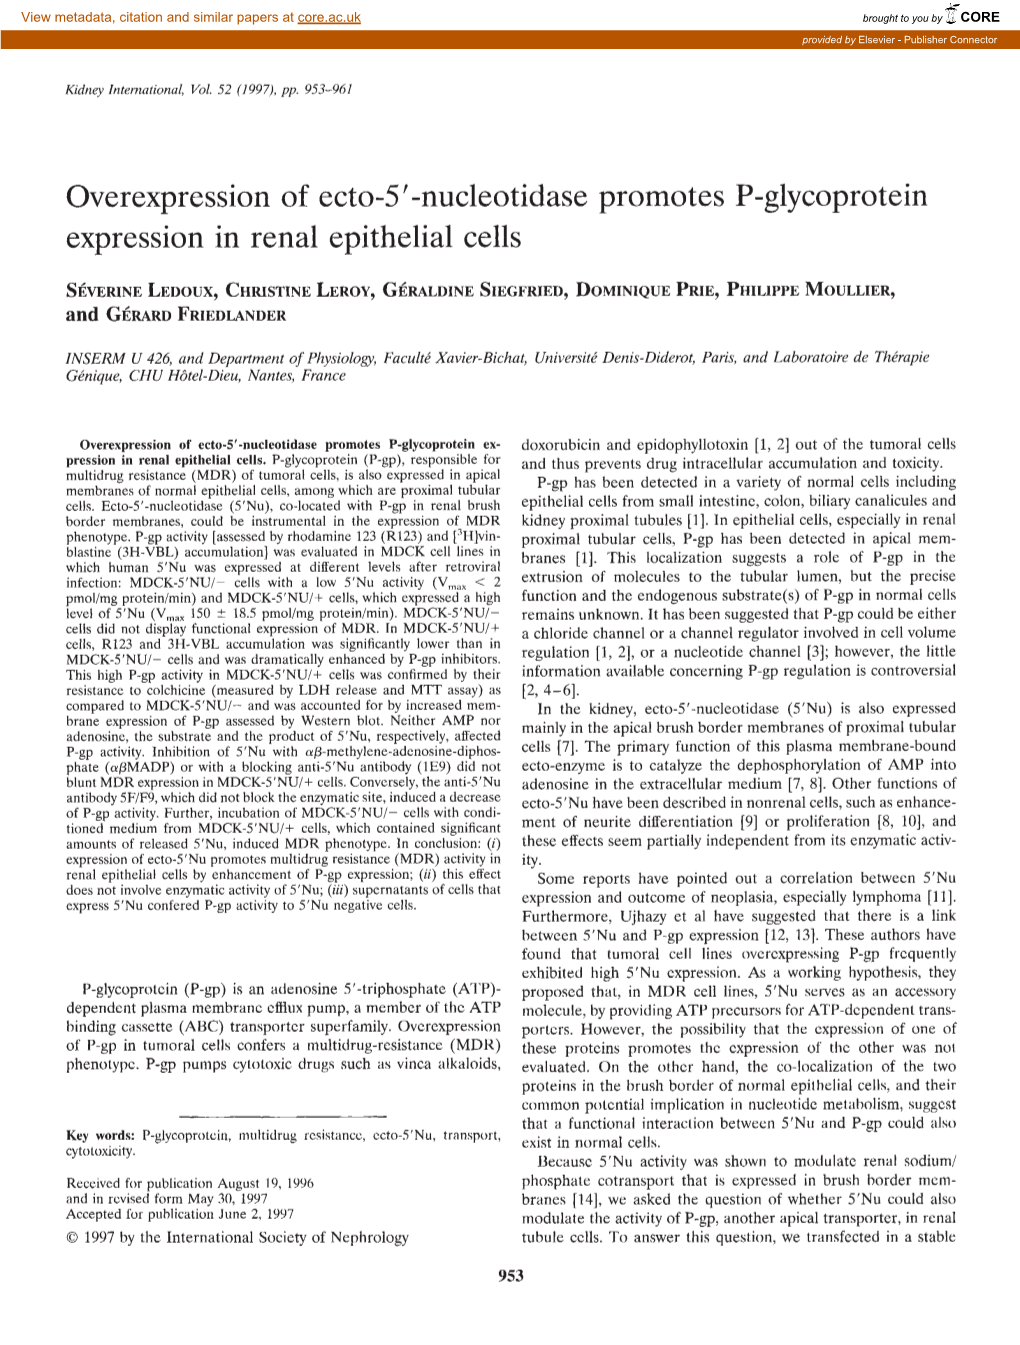 Overexpression of Ecto-5′-Nucleotidase Promotes P